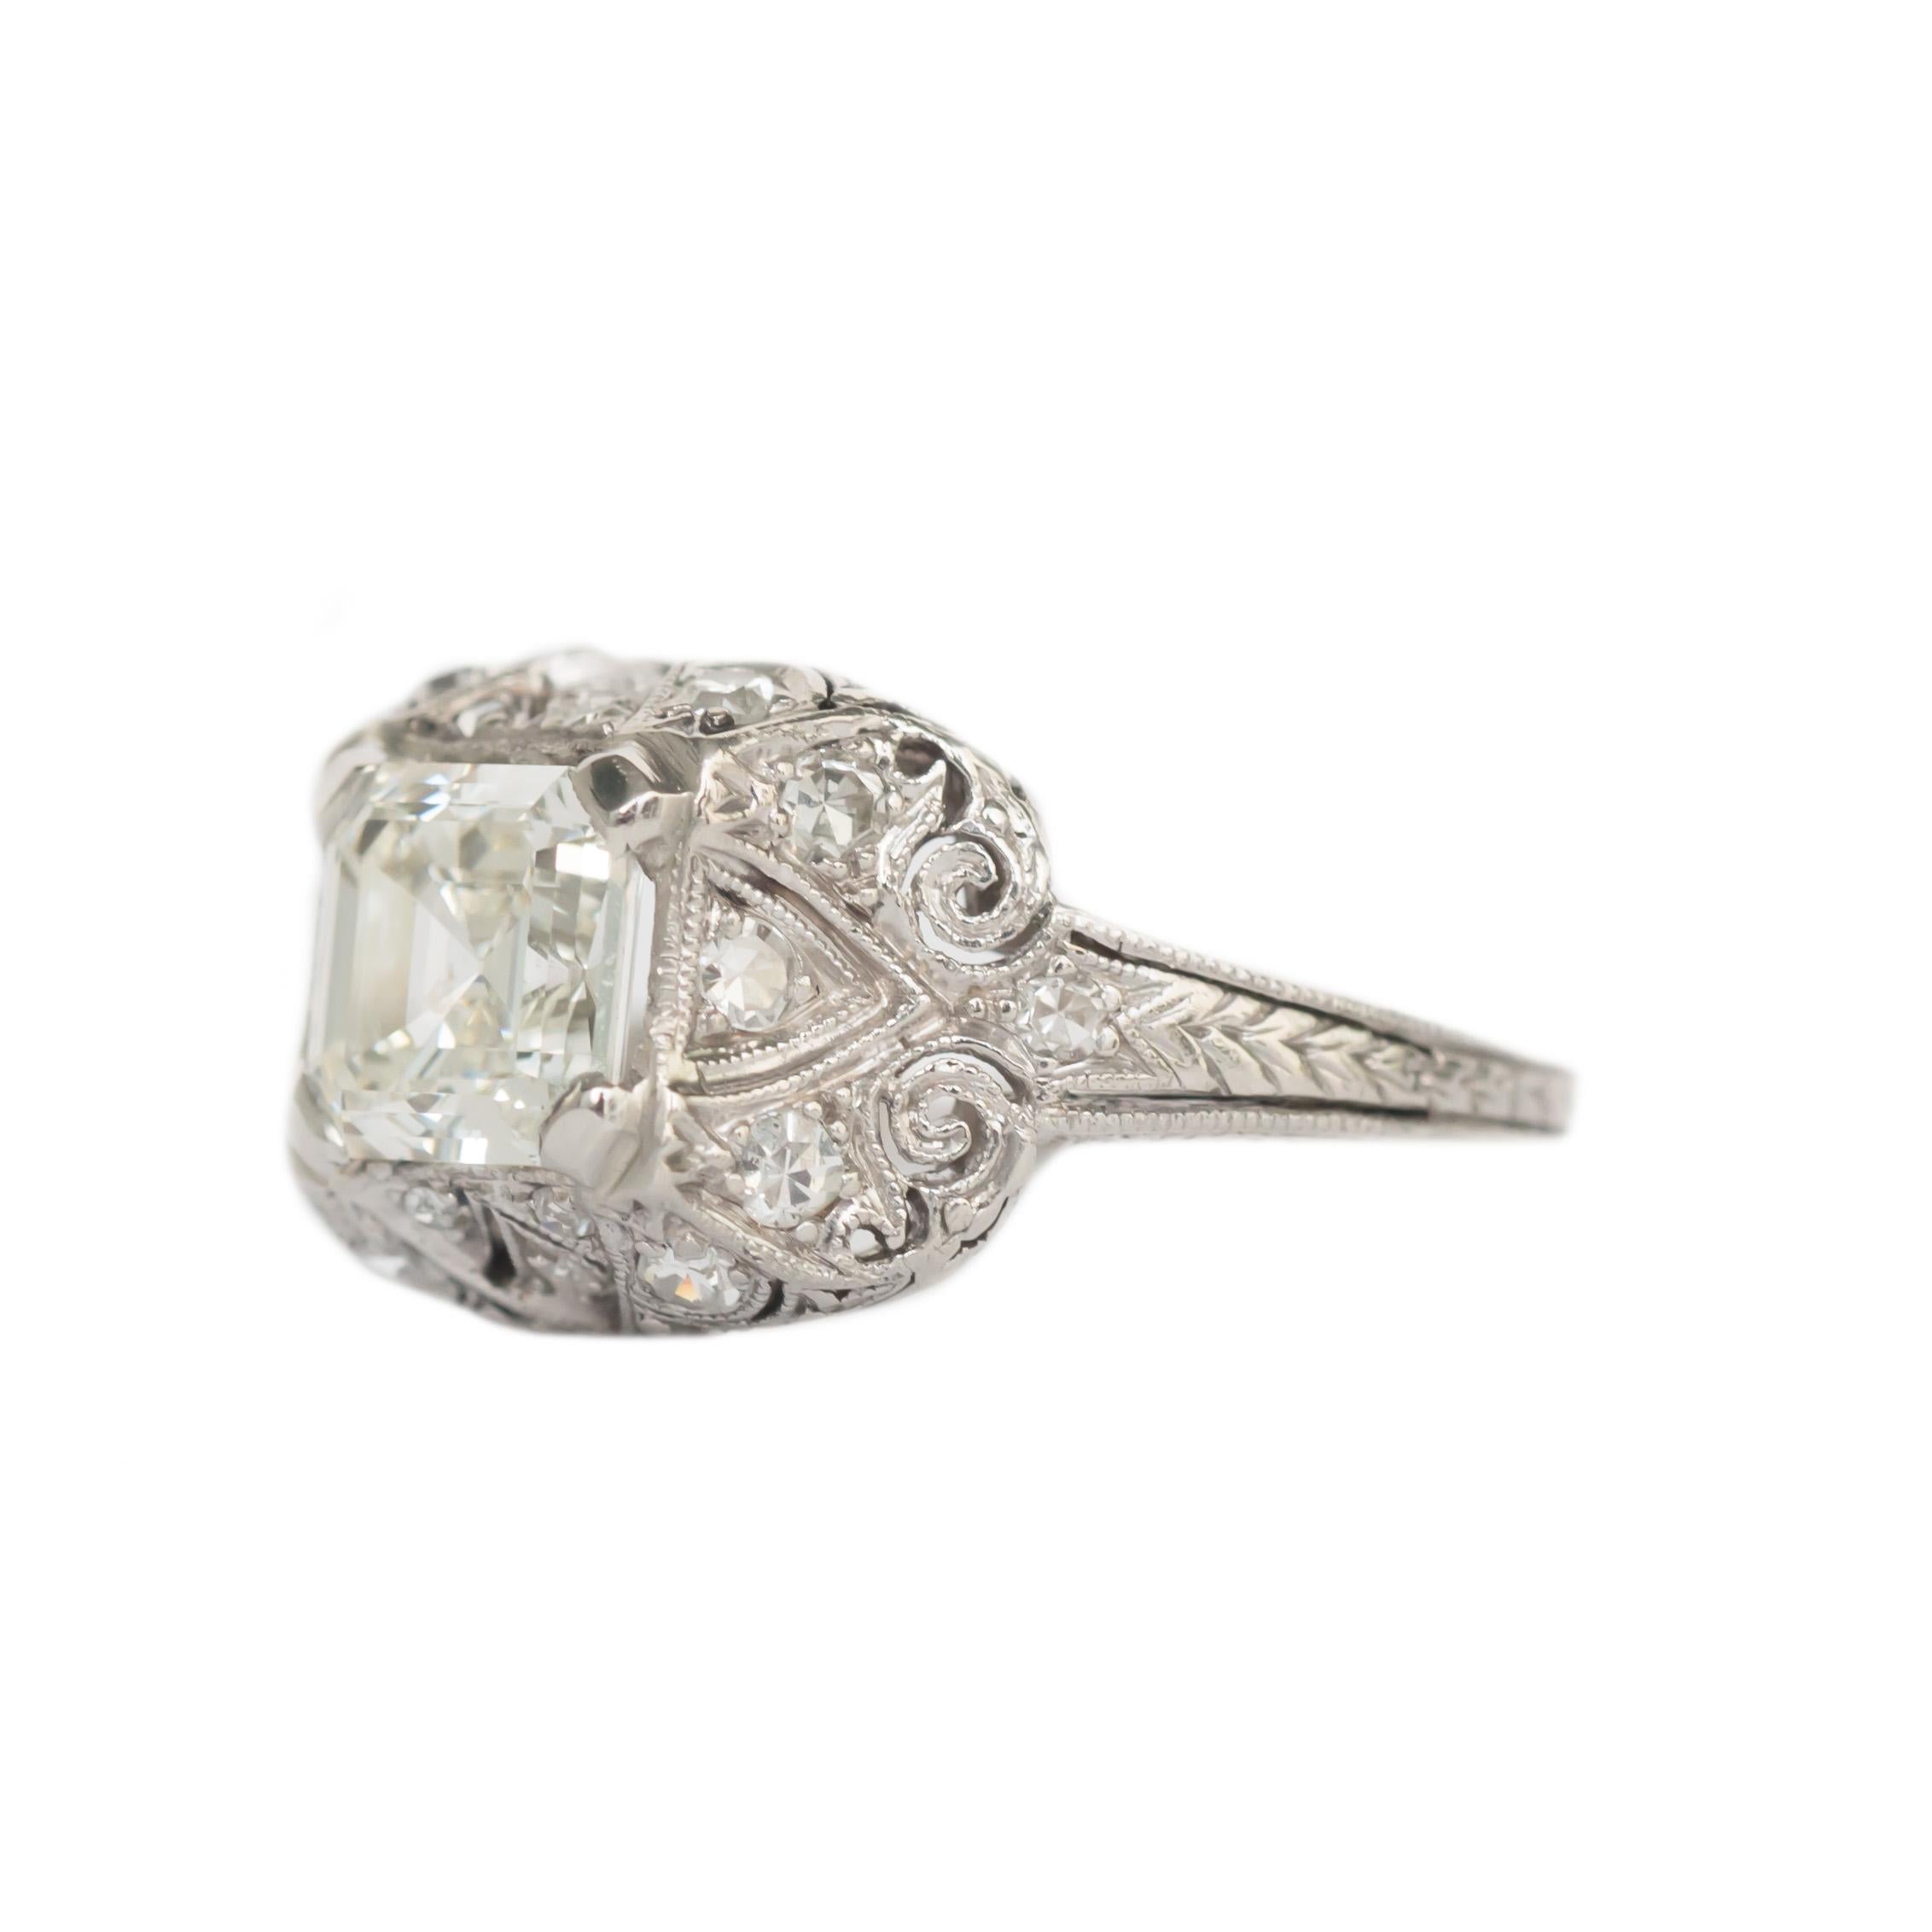 Ring Size: 7
Metal Type: Platinum [Hallmarked, and Tested]
Weight:  5.4 grams

Center Diamond Details:
GIA REPORT # 6204639065
Weight: 1.49 carat
Cut: Antique Asscher
Color: K 
Clarity: VS1

Side Diamond Details:
Weight: .20 carat, total weight
Cut: